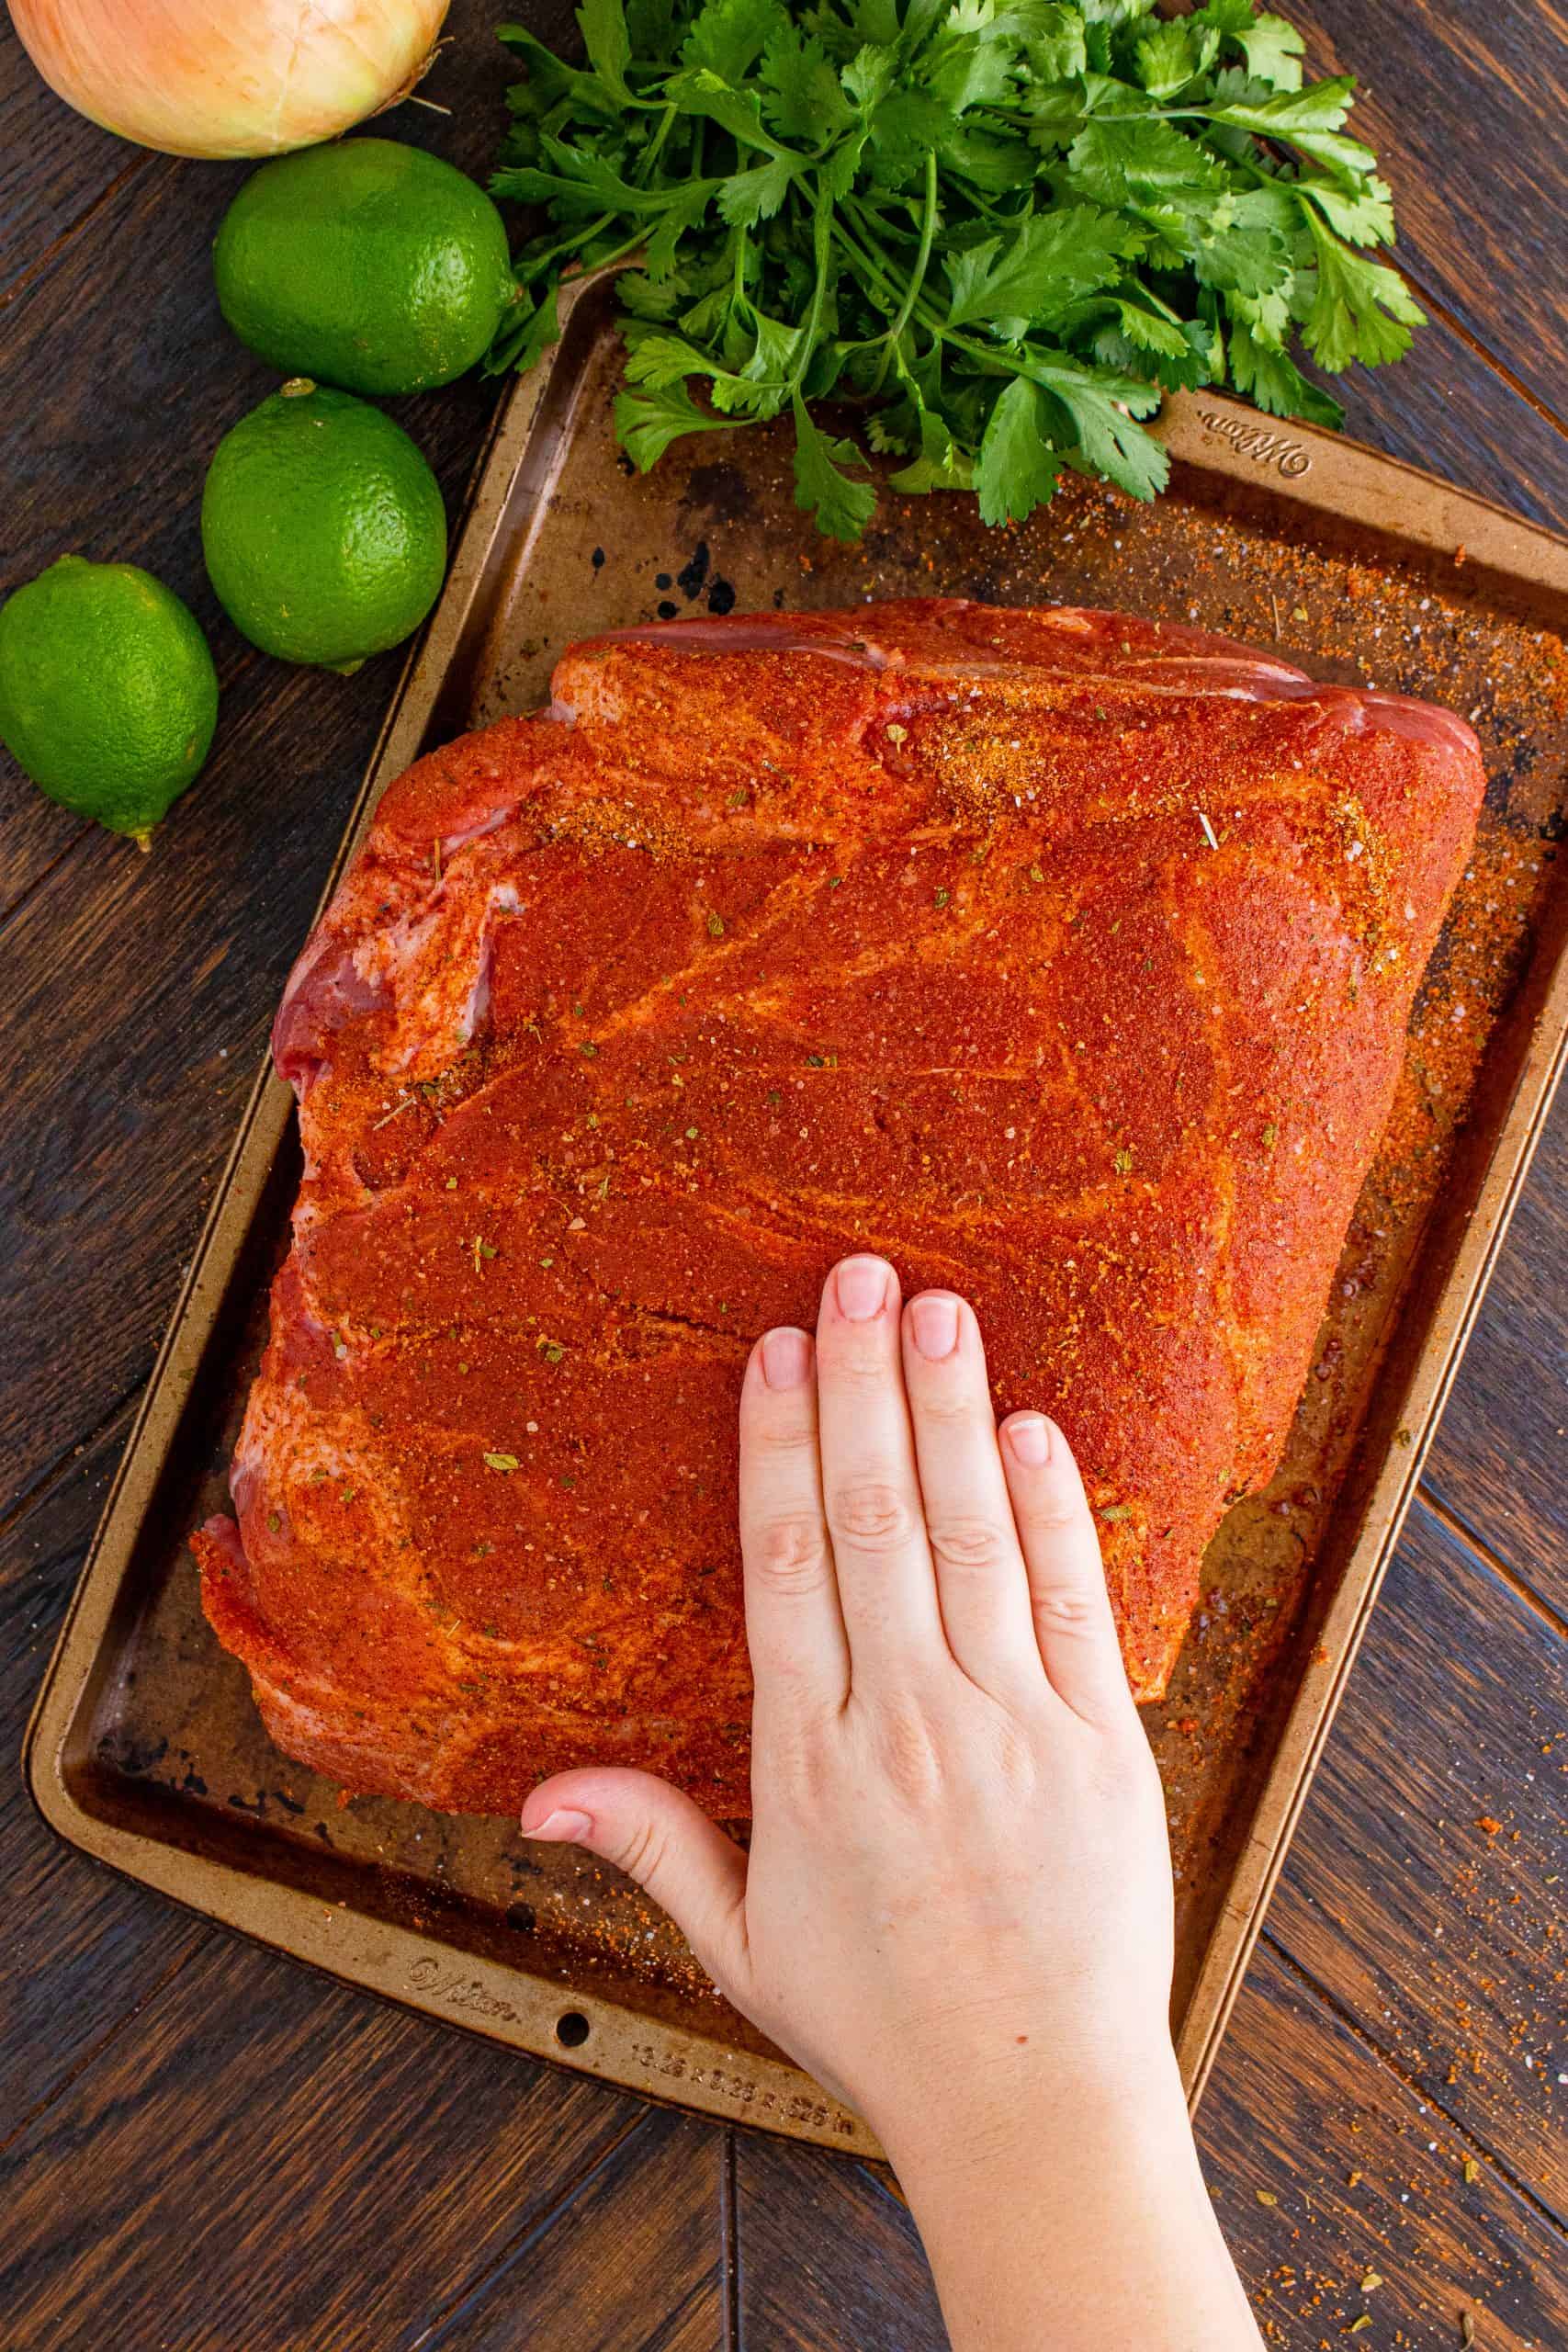 rubbing seasoning and spices into a pork roast on a baking tray.